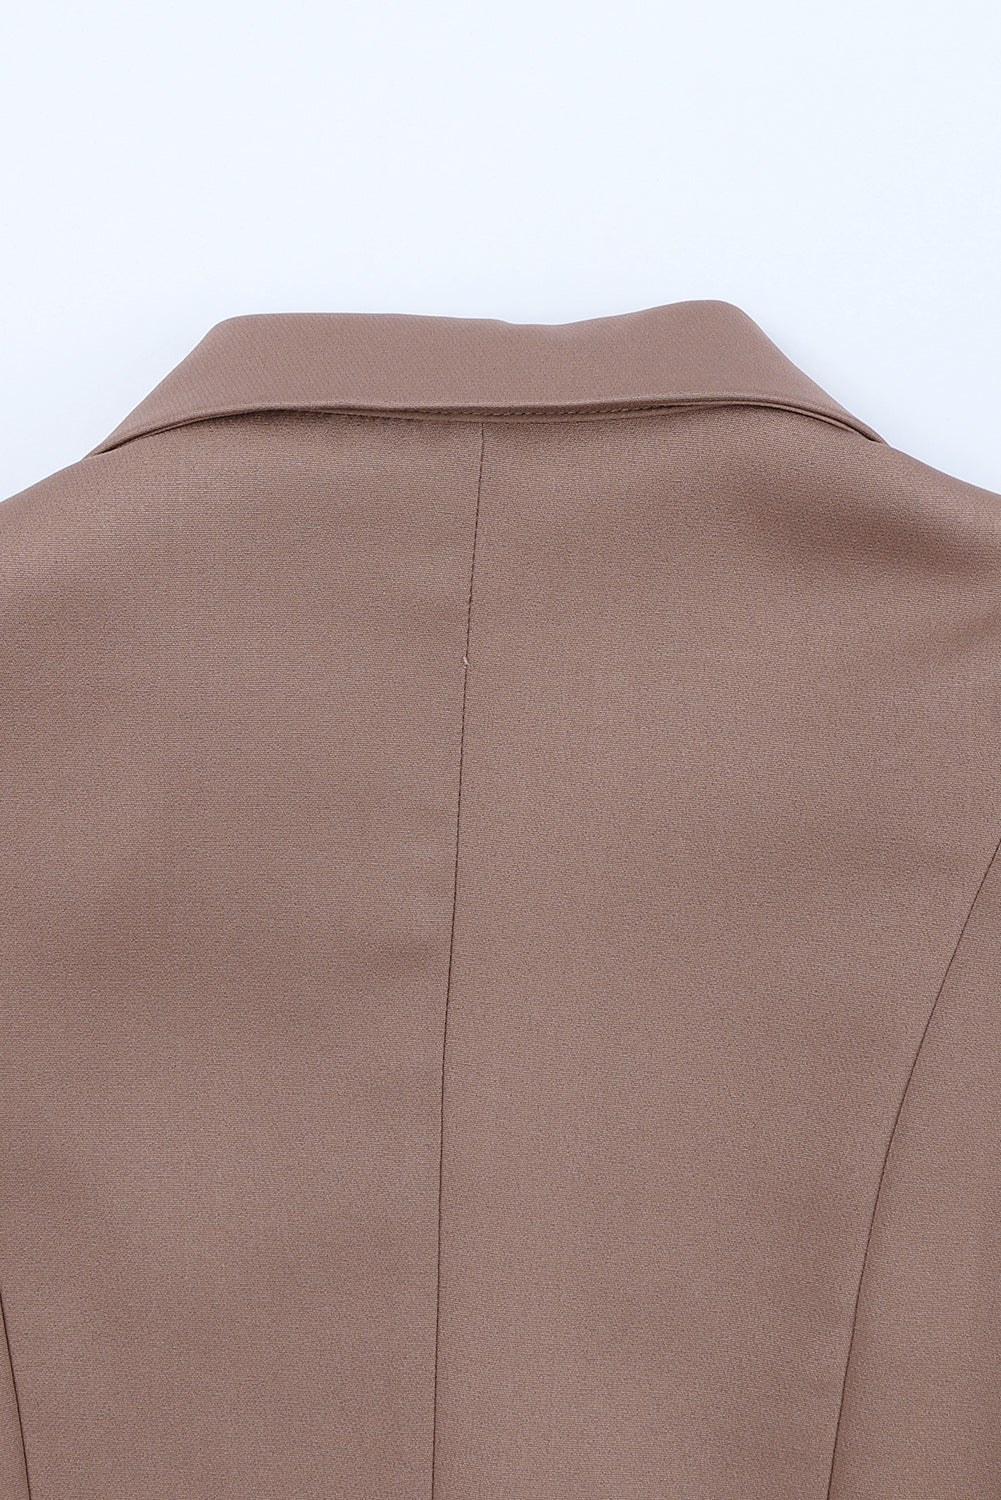 Brown Lapel Neckline Double Breasted Pocketed Blazer